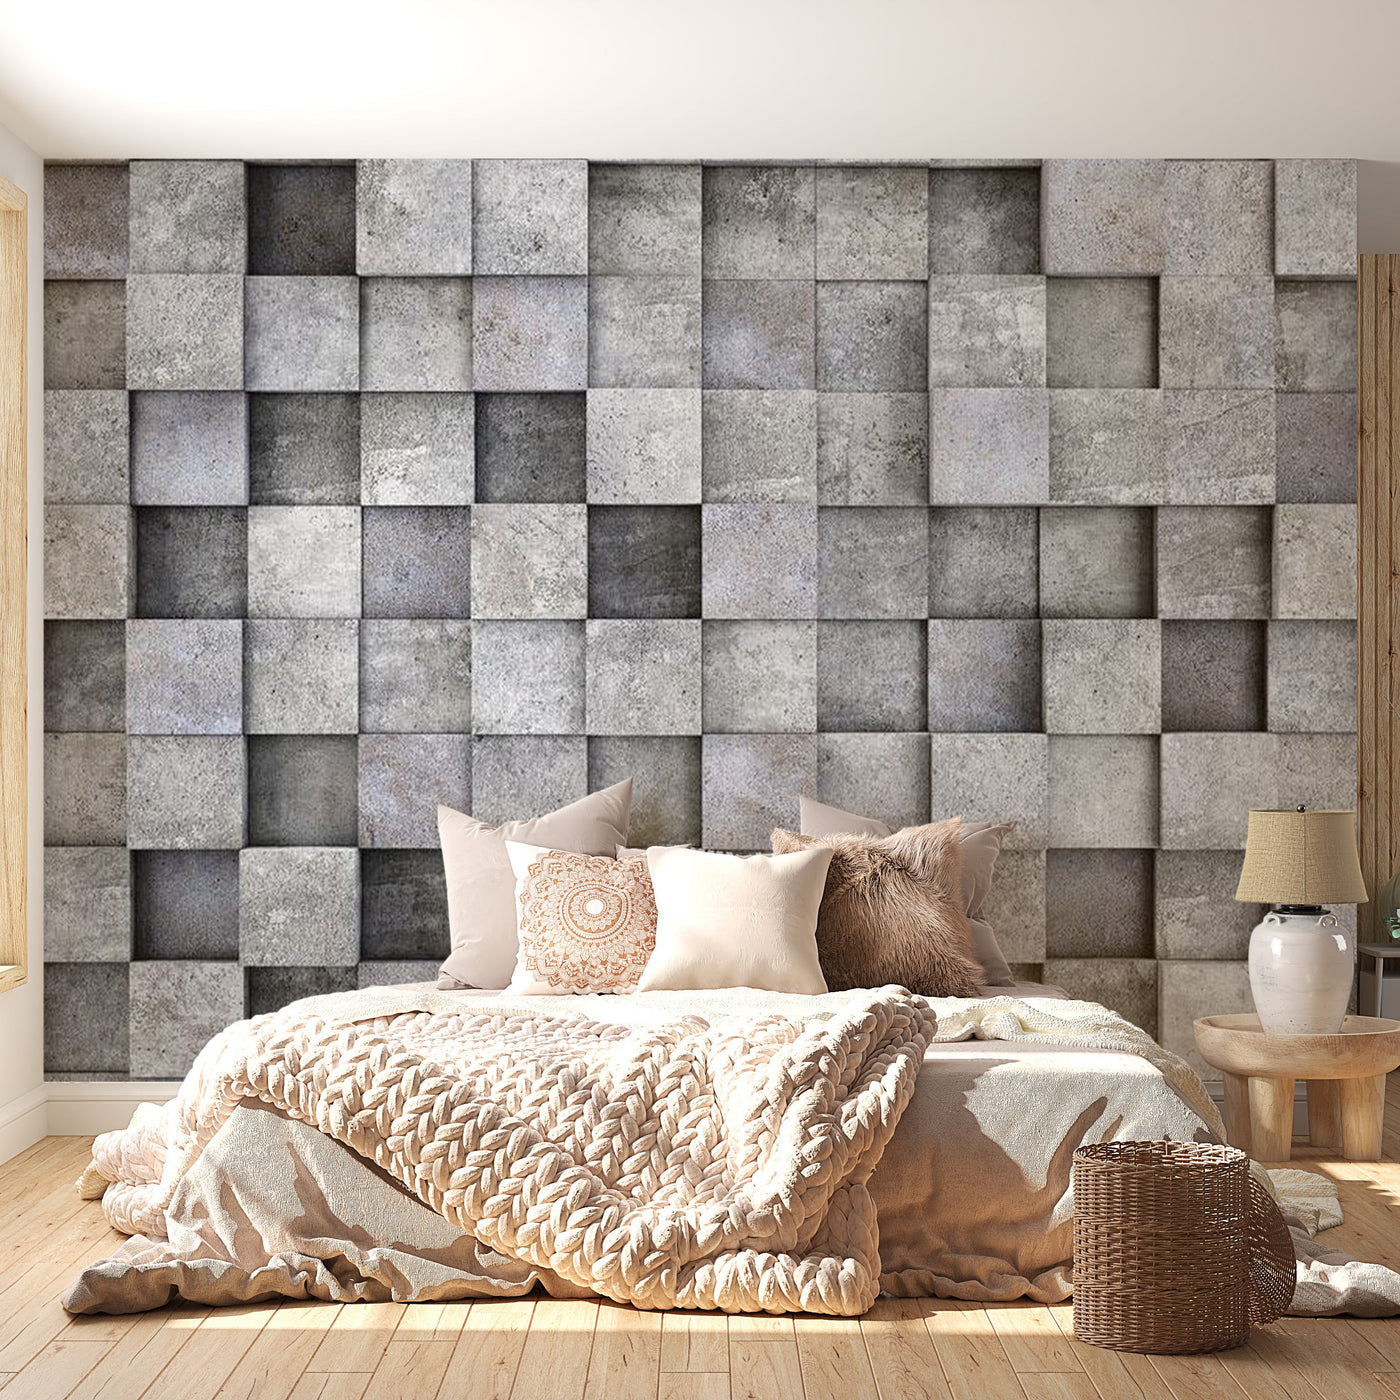 Peel & Stick Wall Mural - Concrete 3D Blocks - Removable Wall Decals